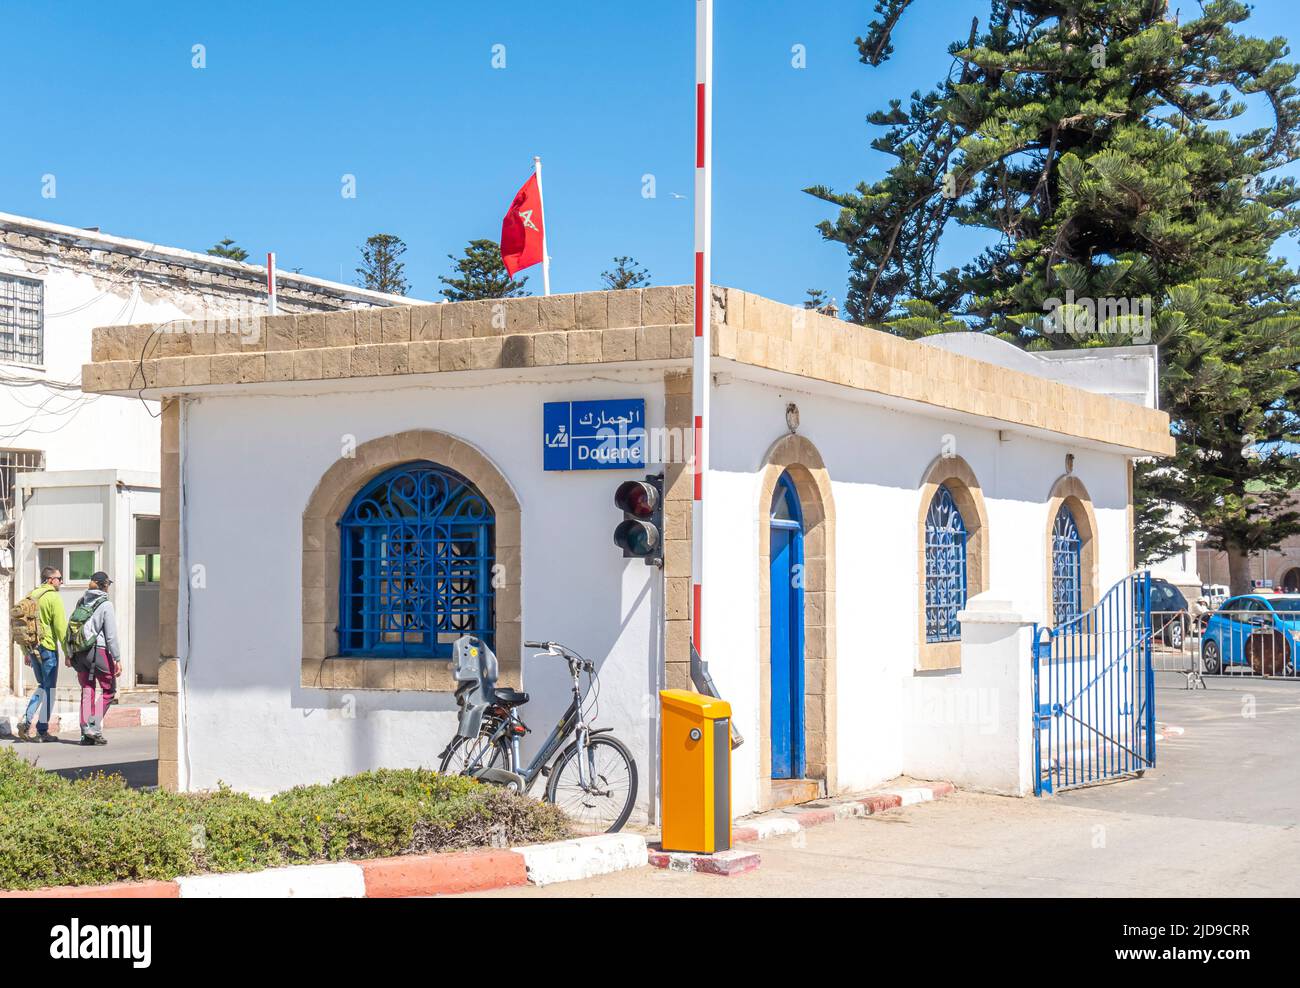 Douane - customs and transportation access point to the port of Essaouira, Morocco Stock Photo